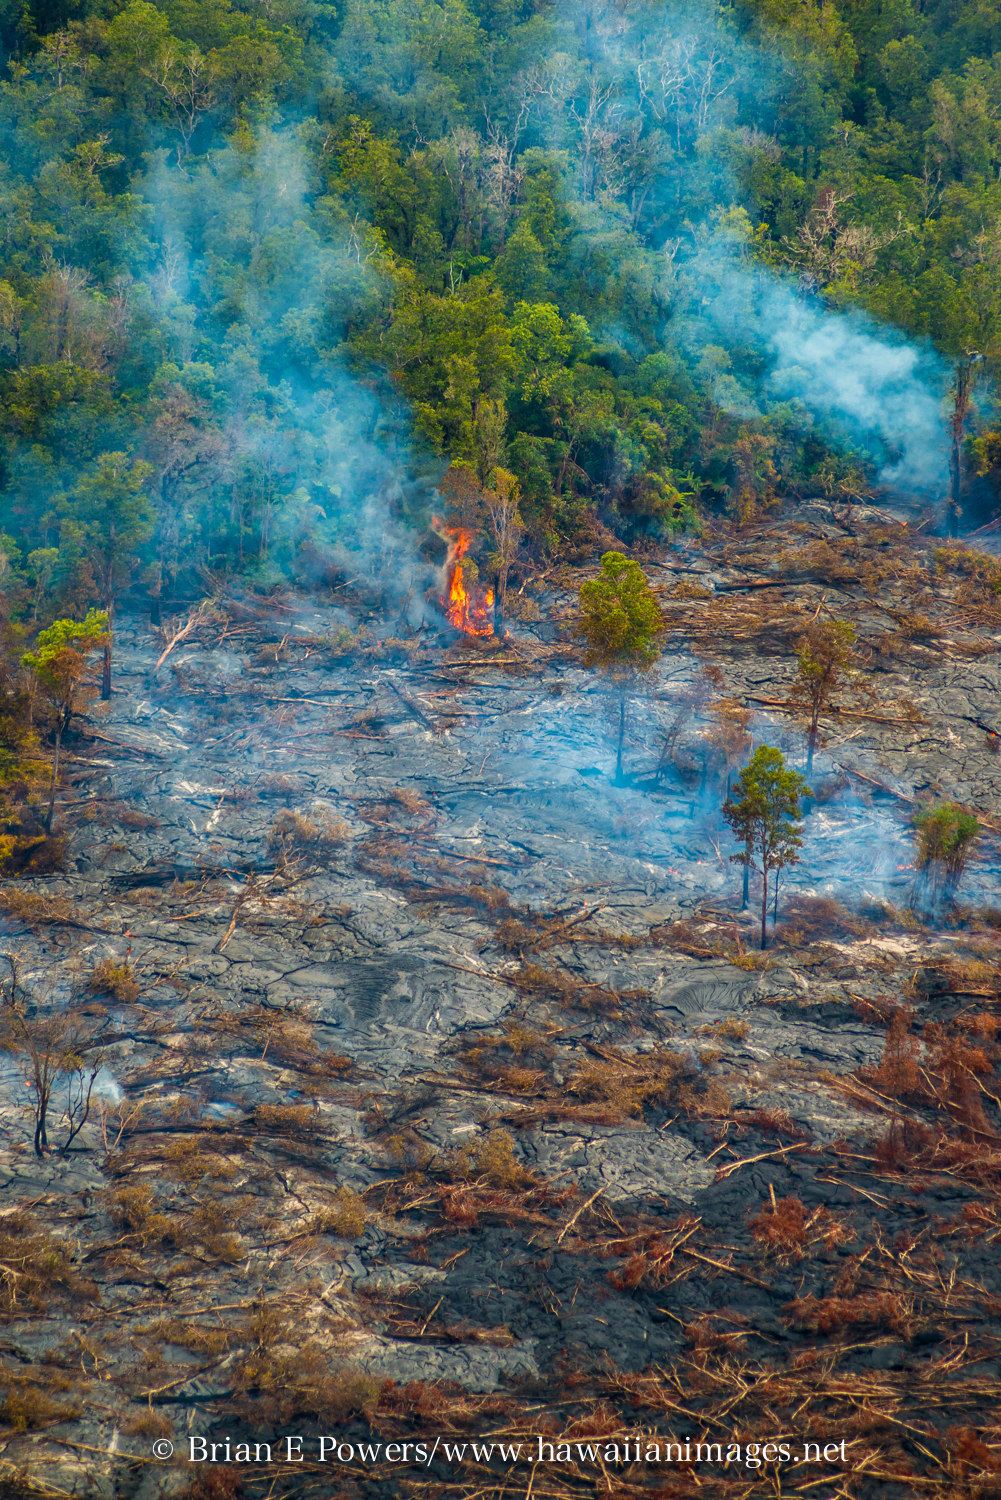 (Courtesy Brian Powers, http://www.hawaiianimages.net ) An ohia tree bursts into flames at the front of the June 27 lava flow on Sunday.